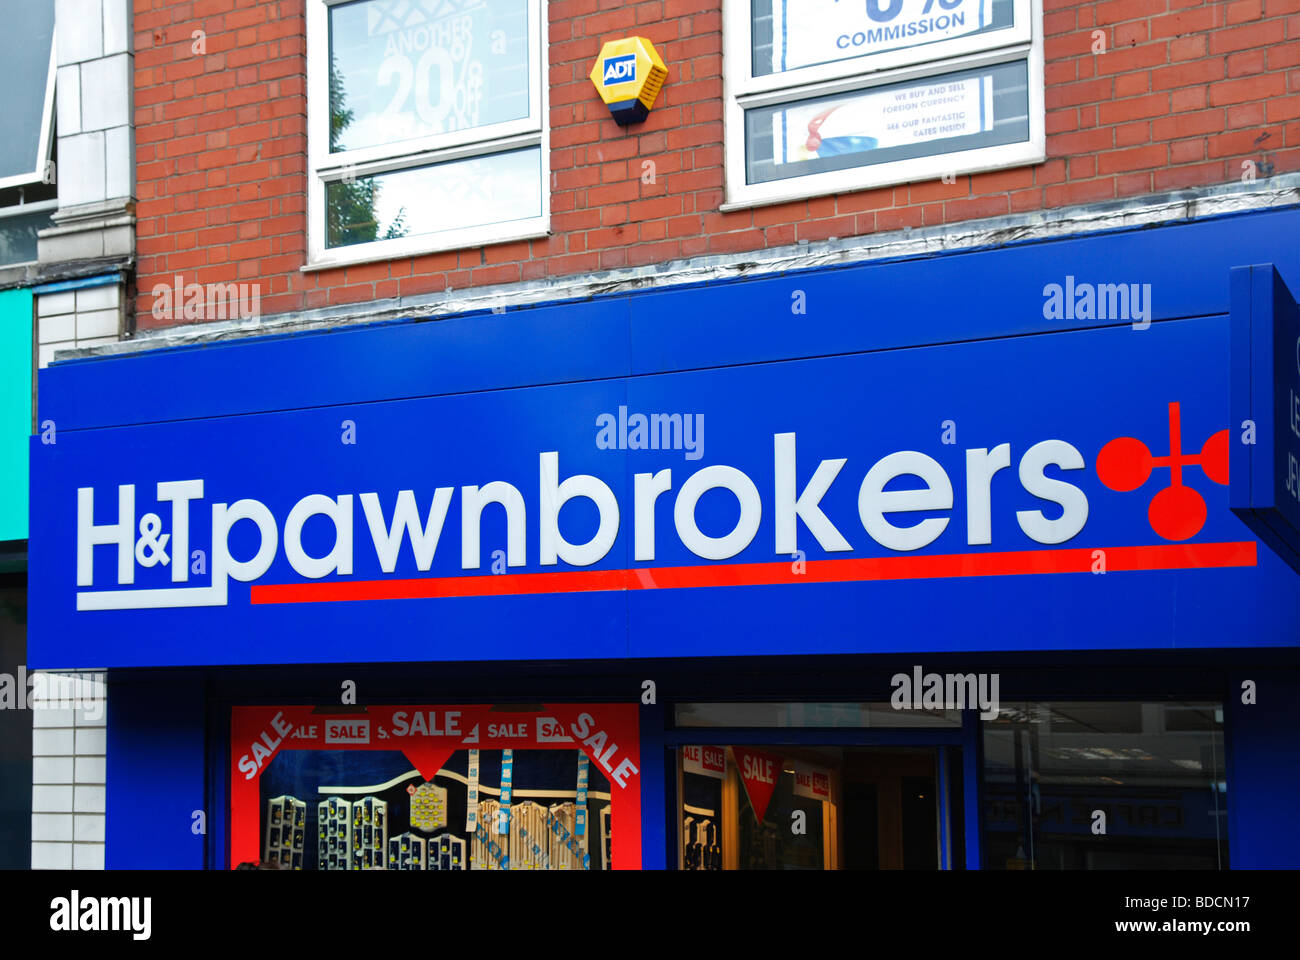 the front sign of a pawnbrokers shop in st.helens, lancashire, uk Stock Photo